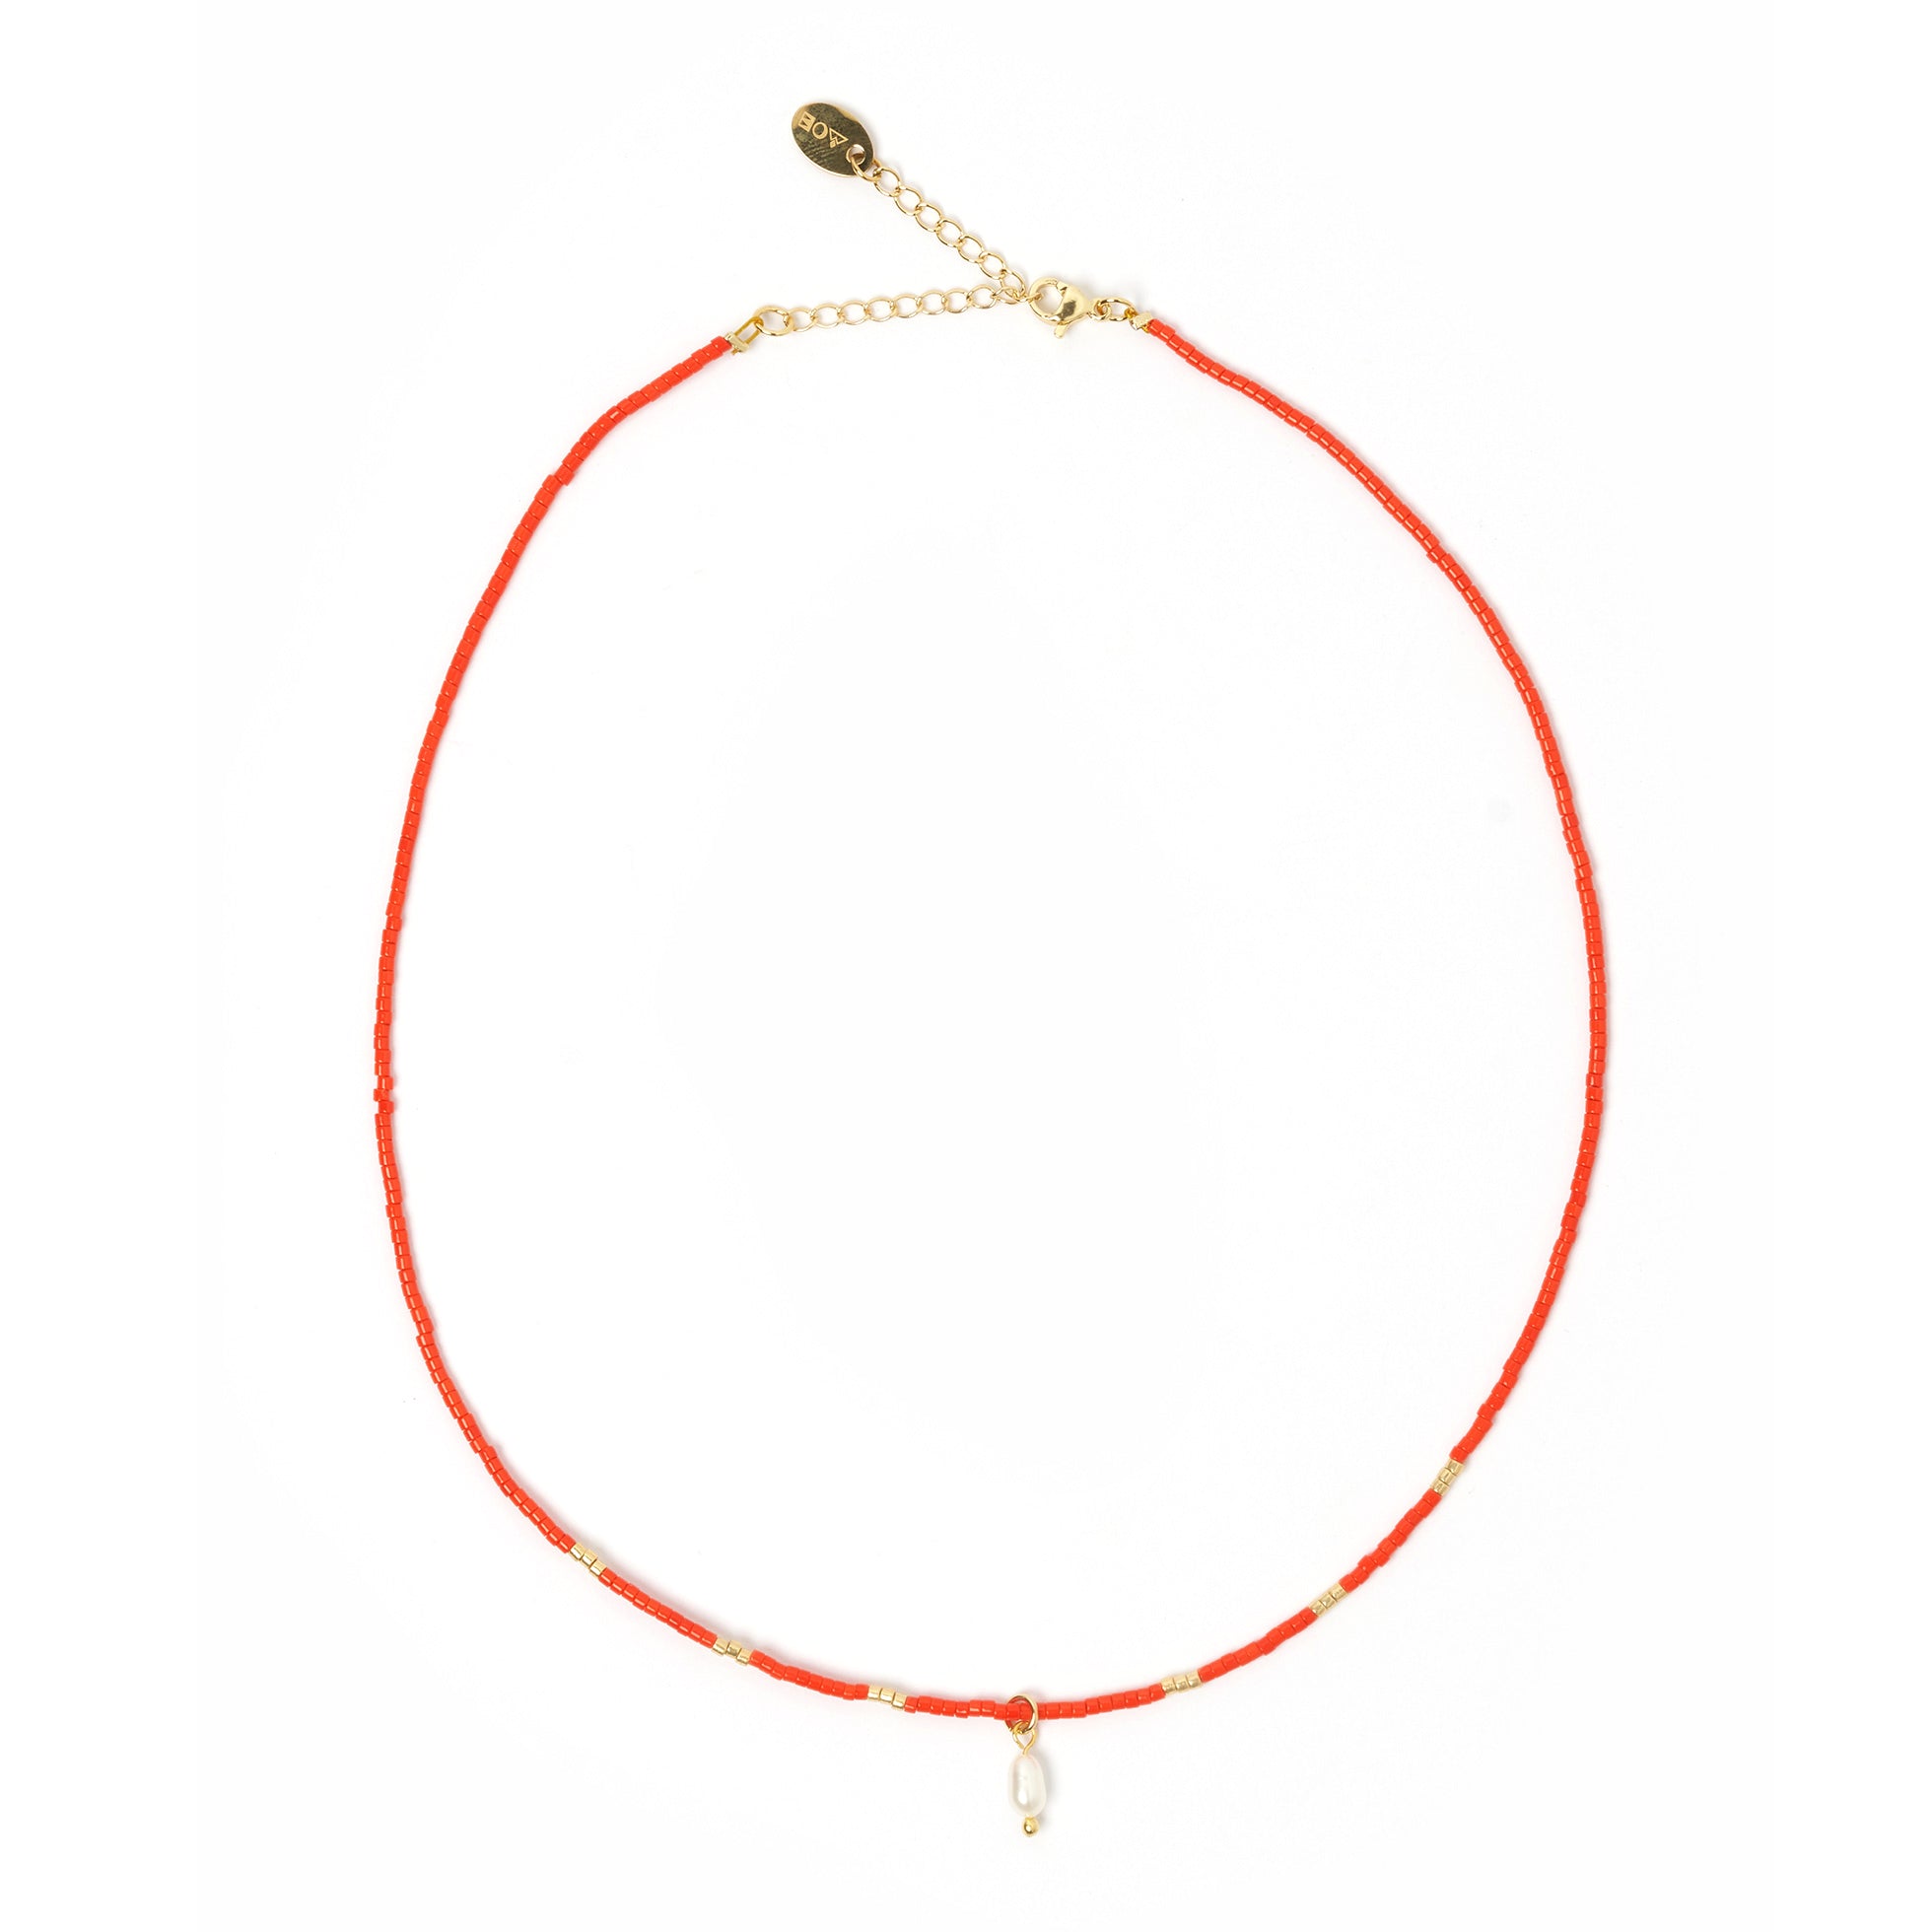 Arms of Eve Zara Necklace - Scarlet Red